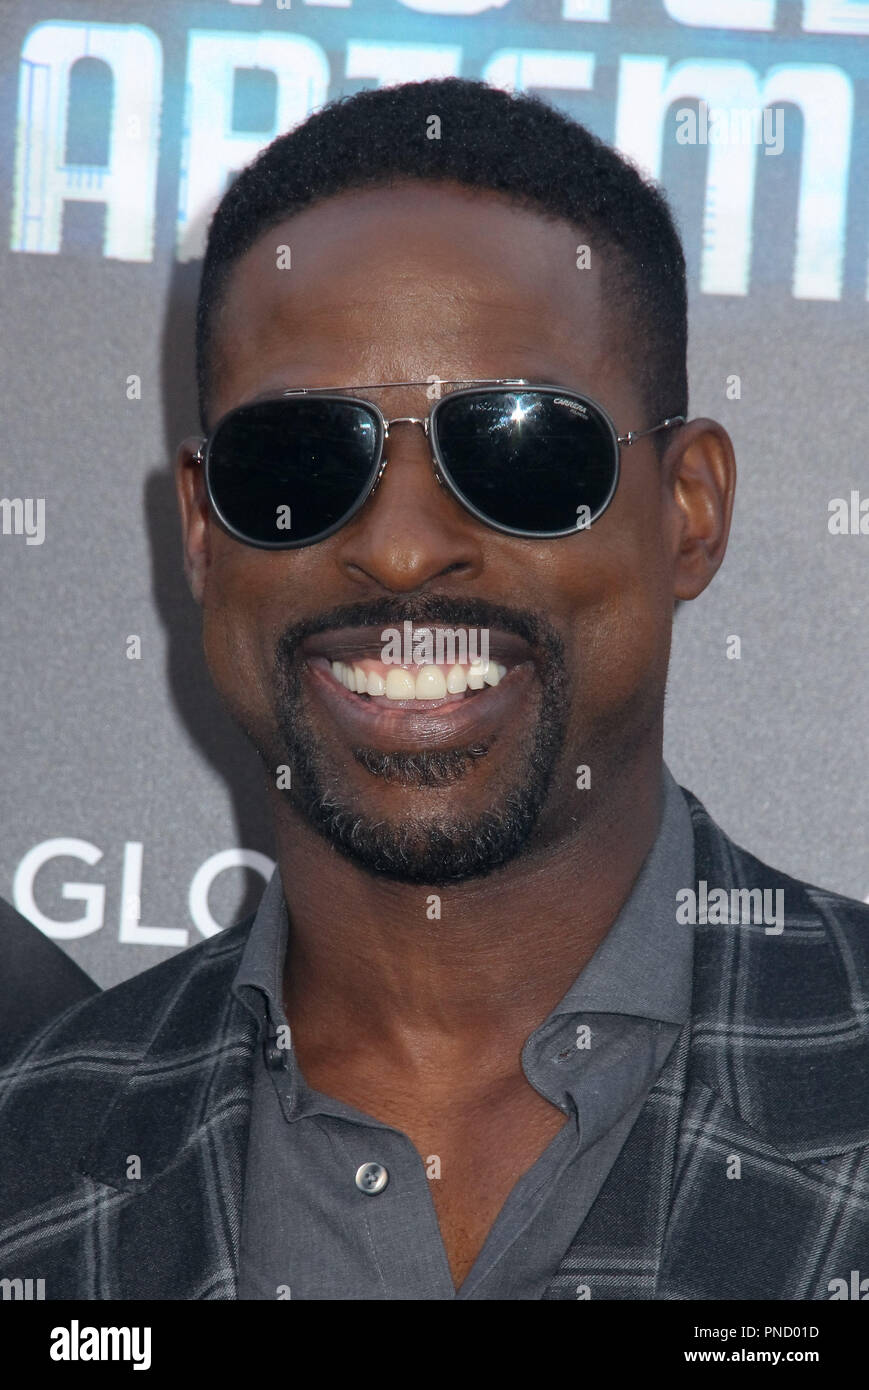 Sterling K. Brown  05/19/2018 The Los Angeles premiere of 'Hotel Artemis' held at the Regency Bruin Theatre in Los Angeles, CA Photo by Izumi Hasegawa / HNW / PictureLux Stock Photo